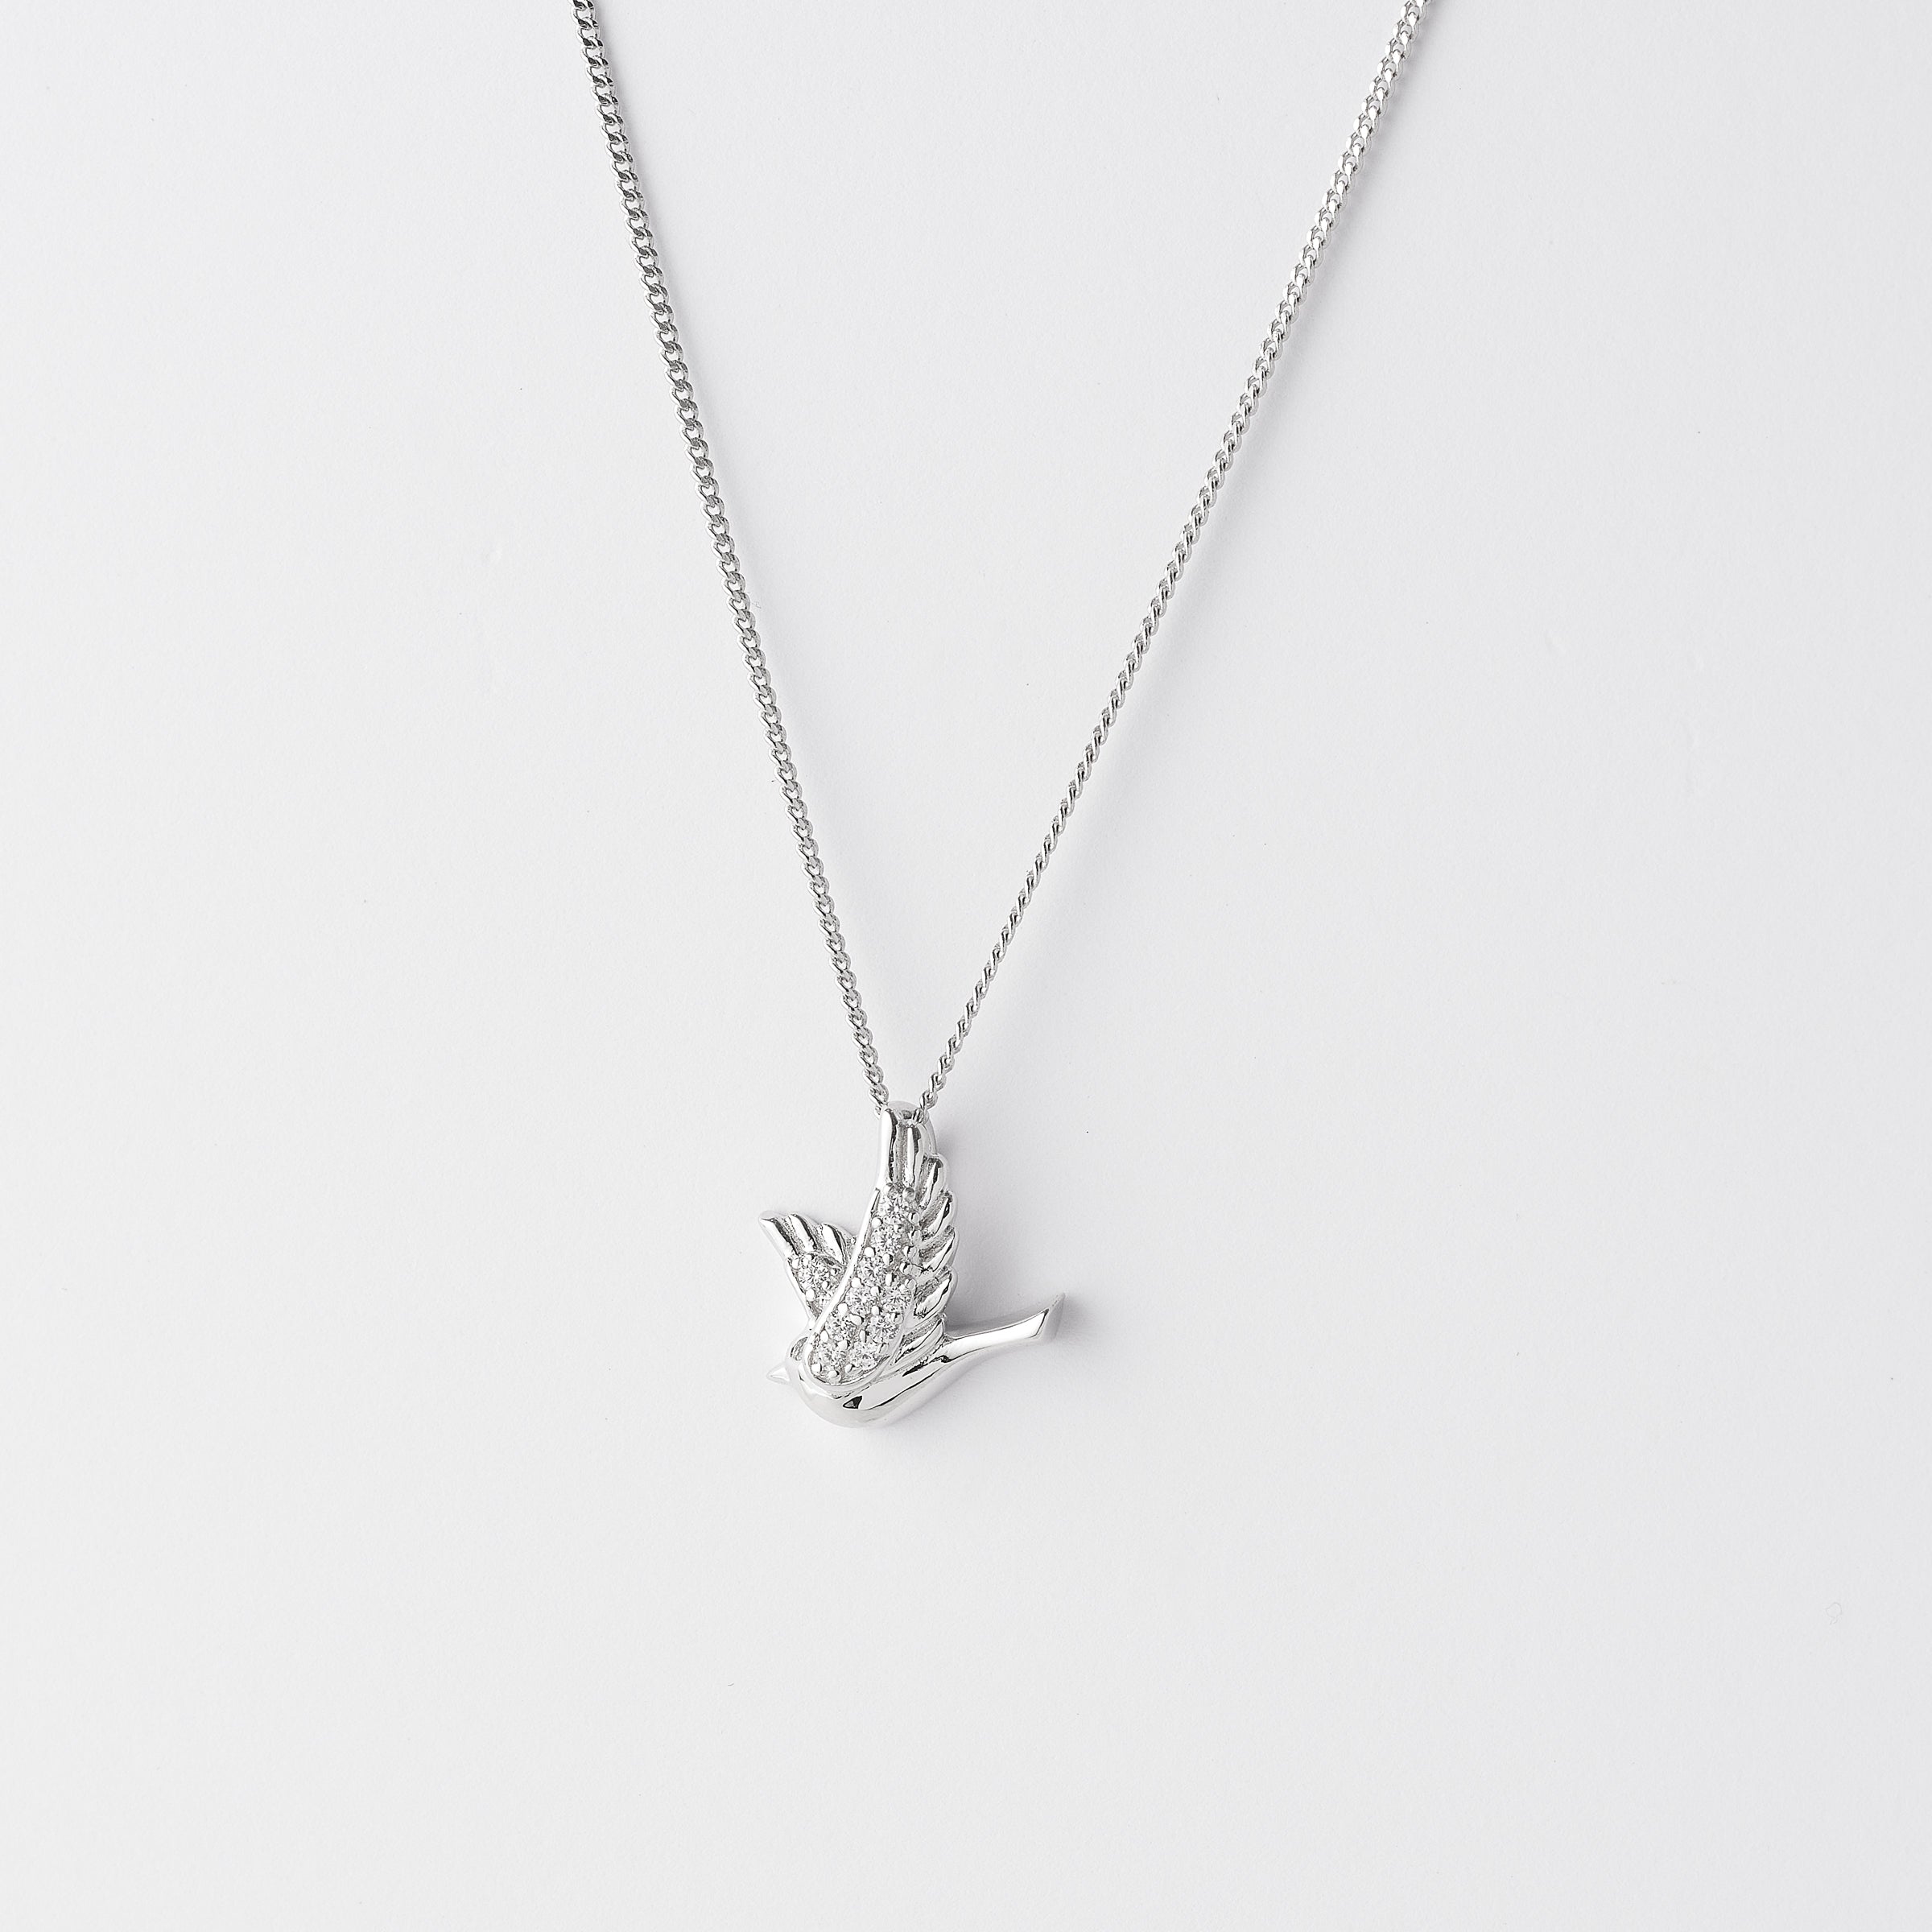 LOUISE VELLA Bird Necklace Sterling Silver 18K Gold India | Ubuy